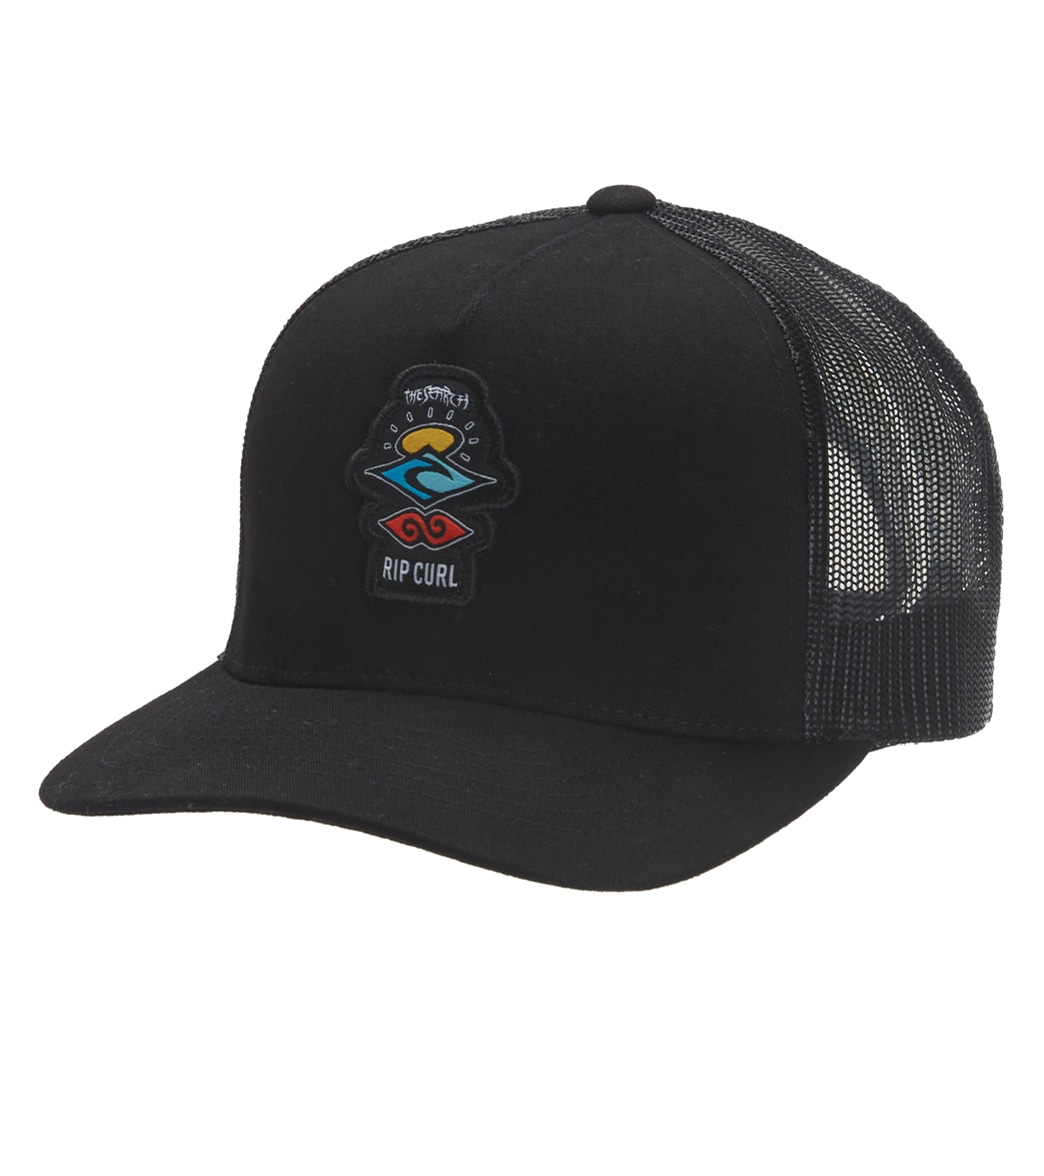 Rip Curl Men's Icons Eco Trucker Hat - Black/Red One Size - Swimoutlet.com